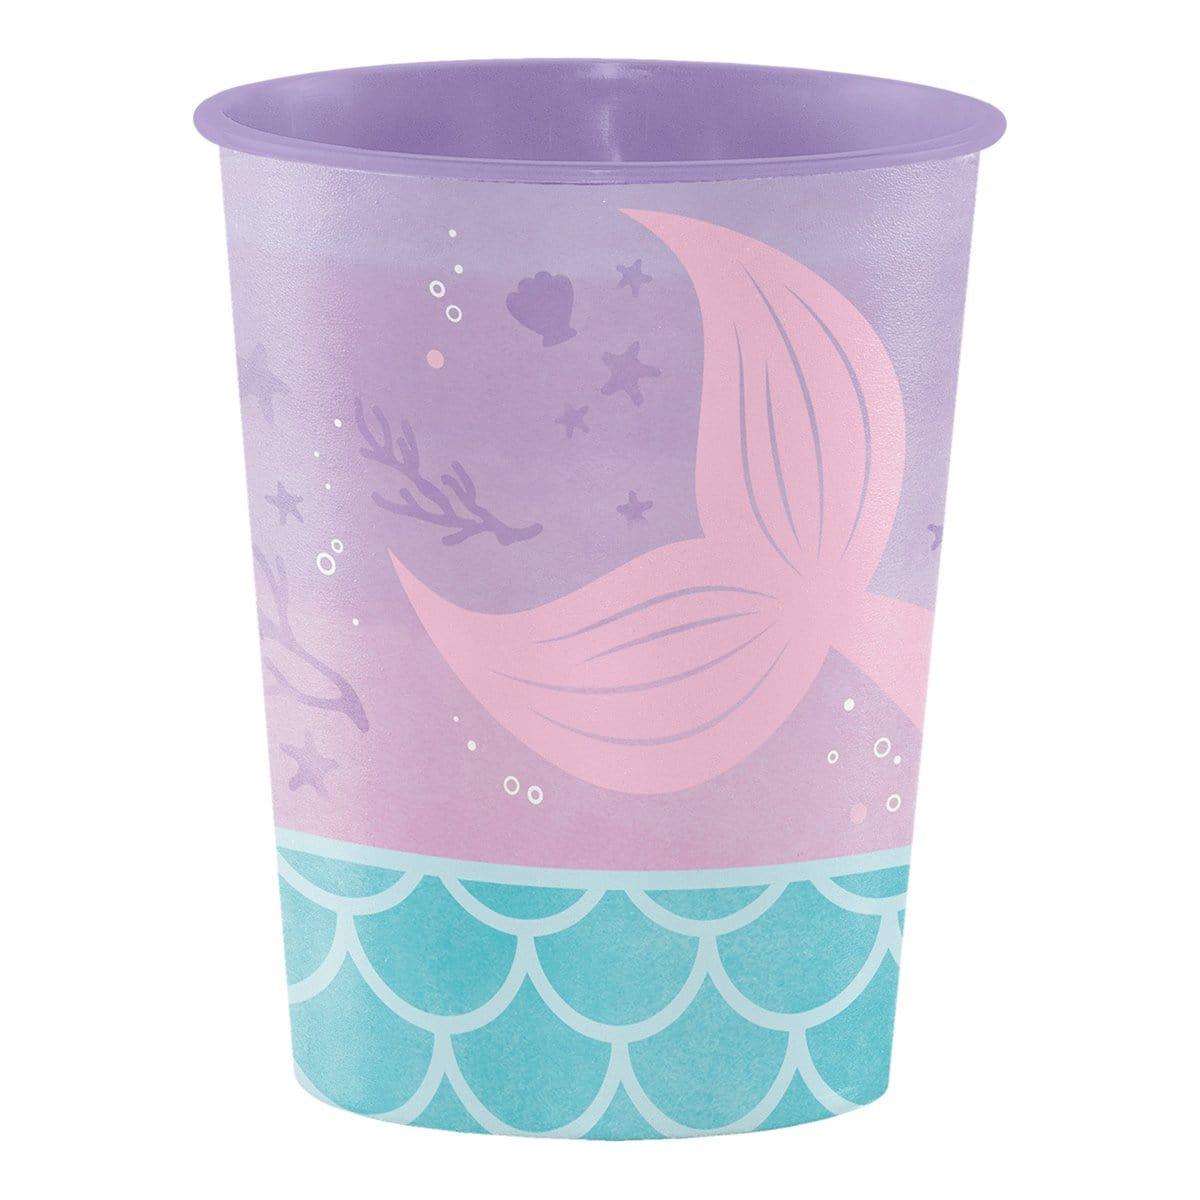 Buy Kids Birthday Mermaid Shine plastic favor cup sold at Party Expert